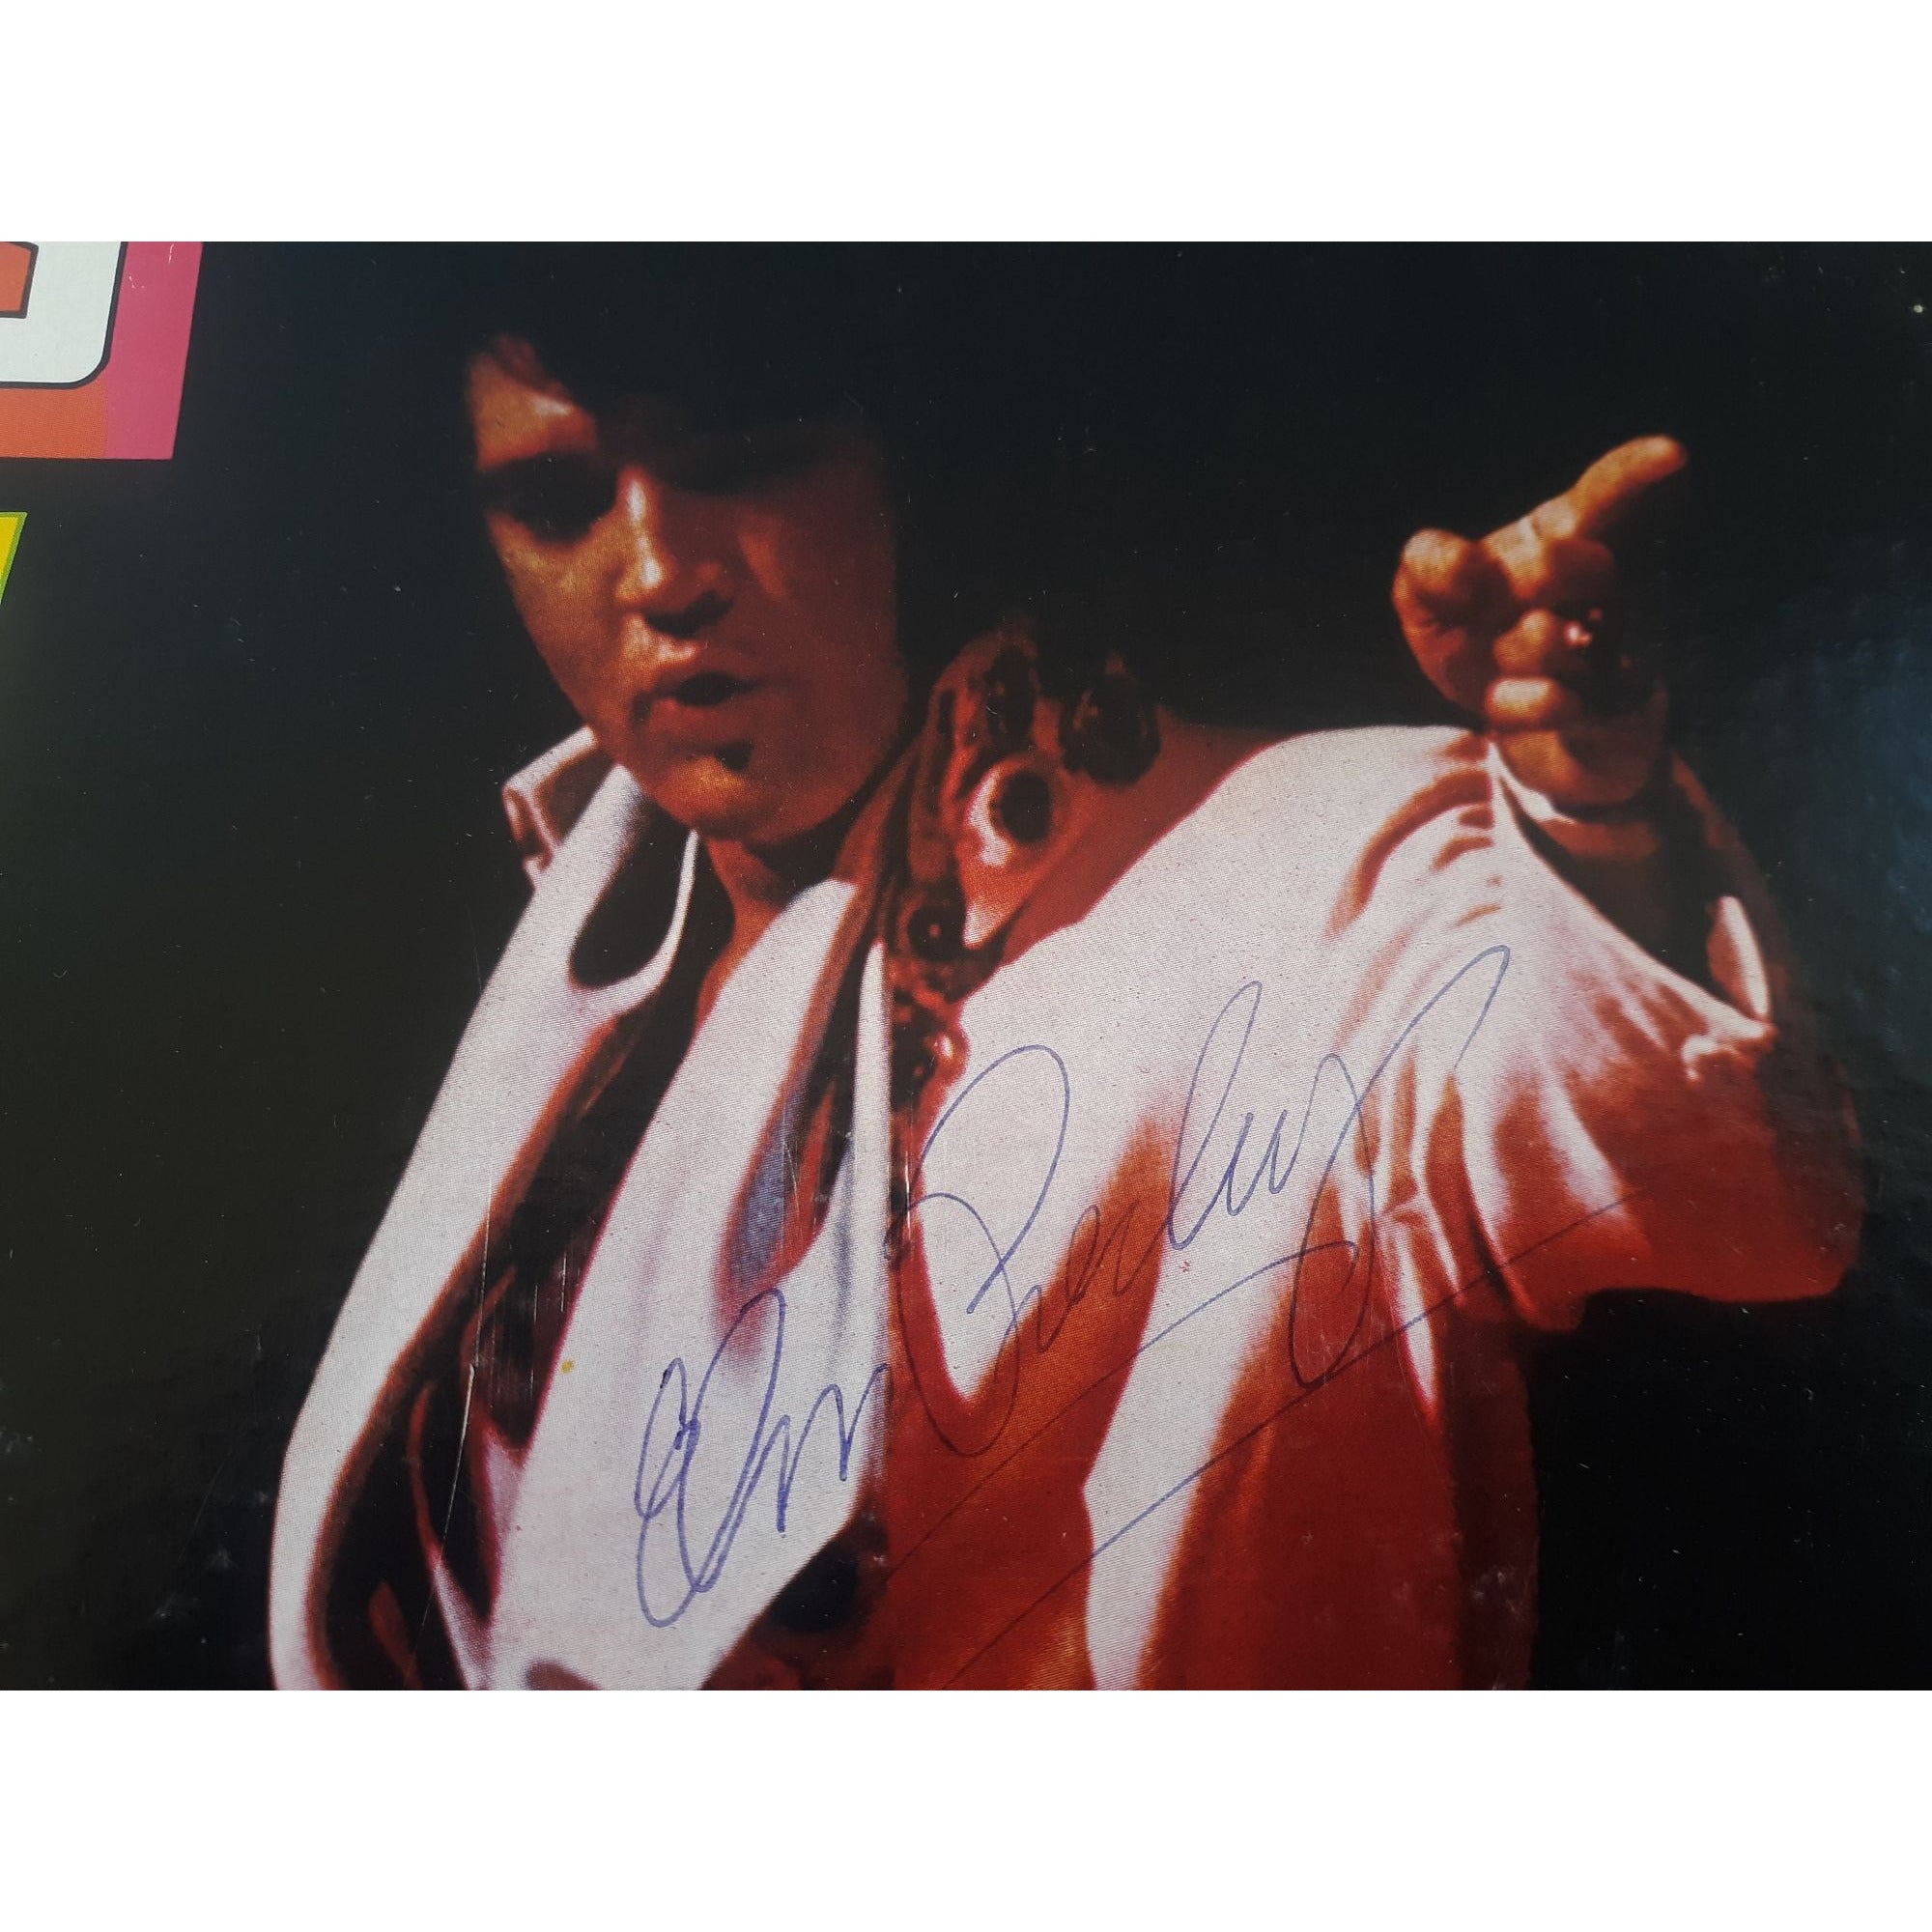 Elvis Presley "Now" LP and vinyl signed with proof